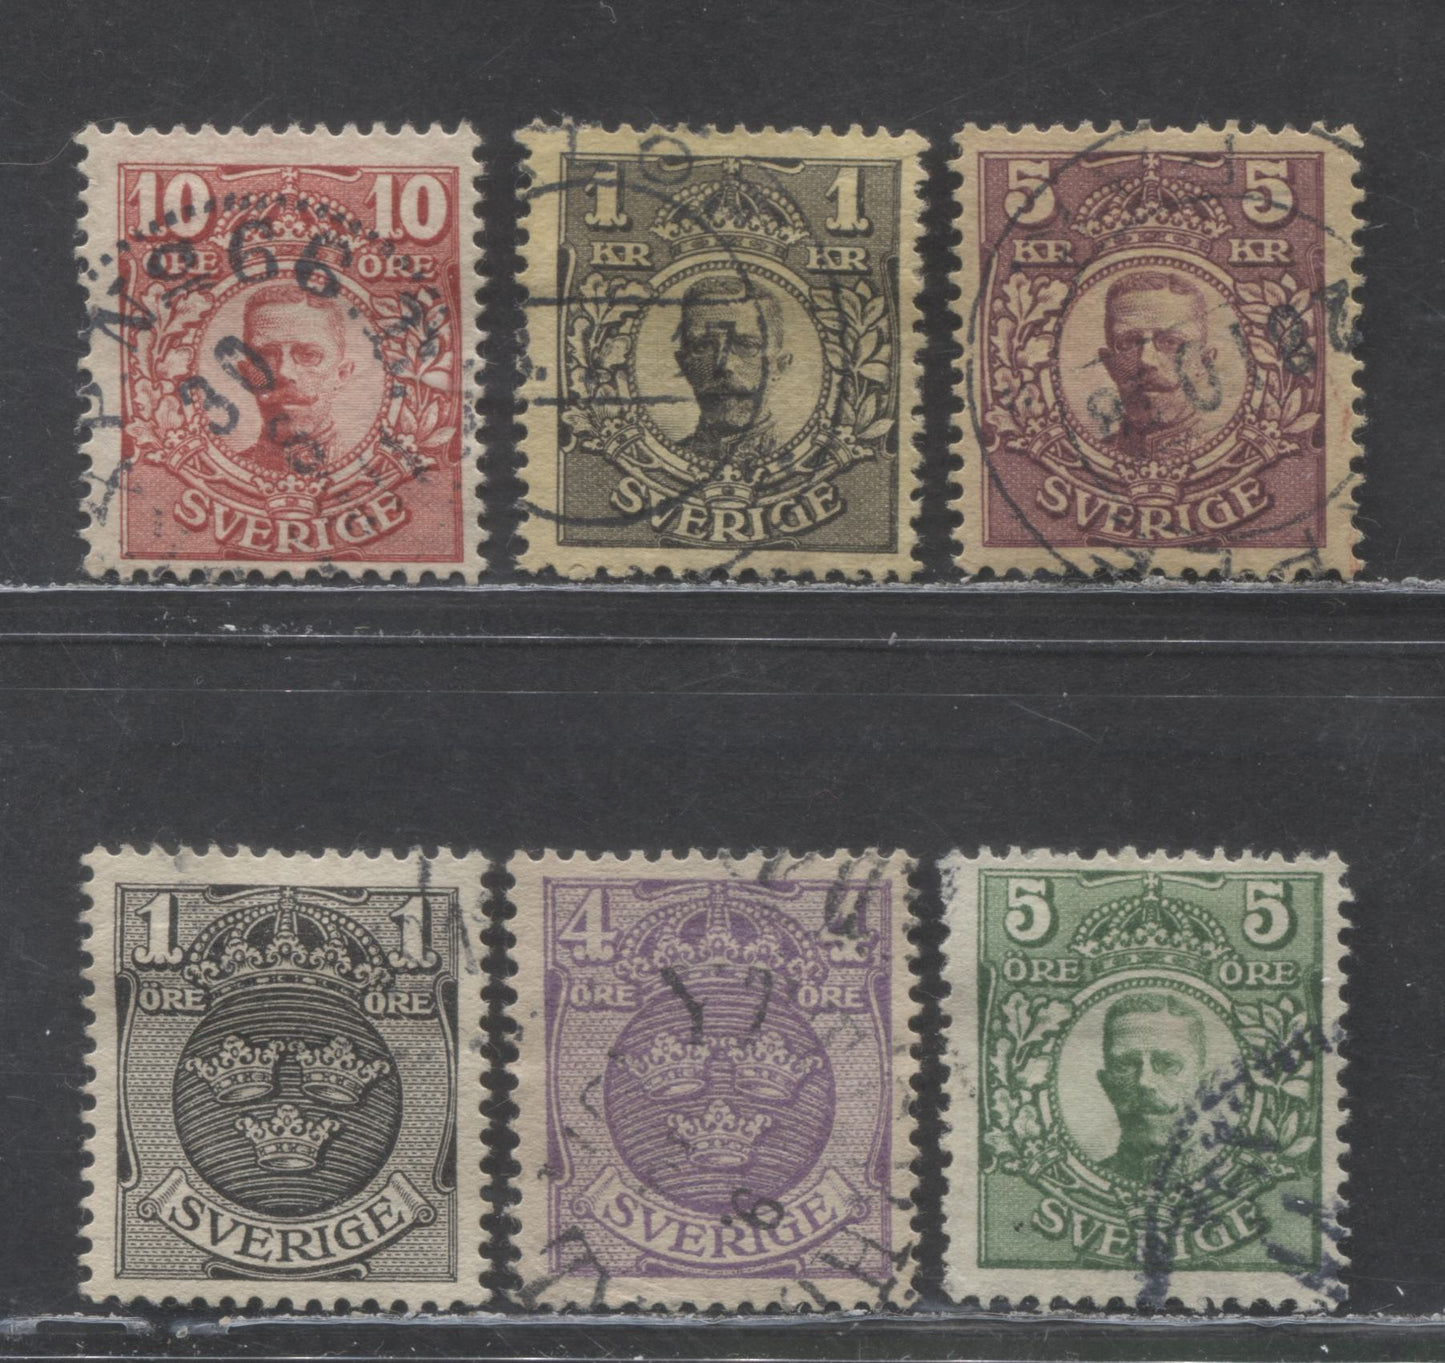 Lot 194 Sweden SC#67/73 1910-1914 Arms & Gustav Issues With Crown Watermark, 6 Fine/Very Fine Used Singles, Click on Listing to See ALL Pictures, 2022 Scott Classic Cat. $35.6 USD